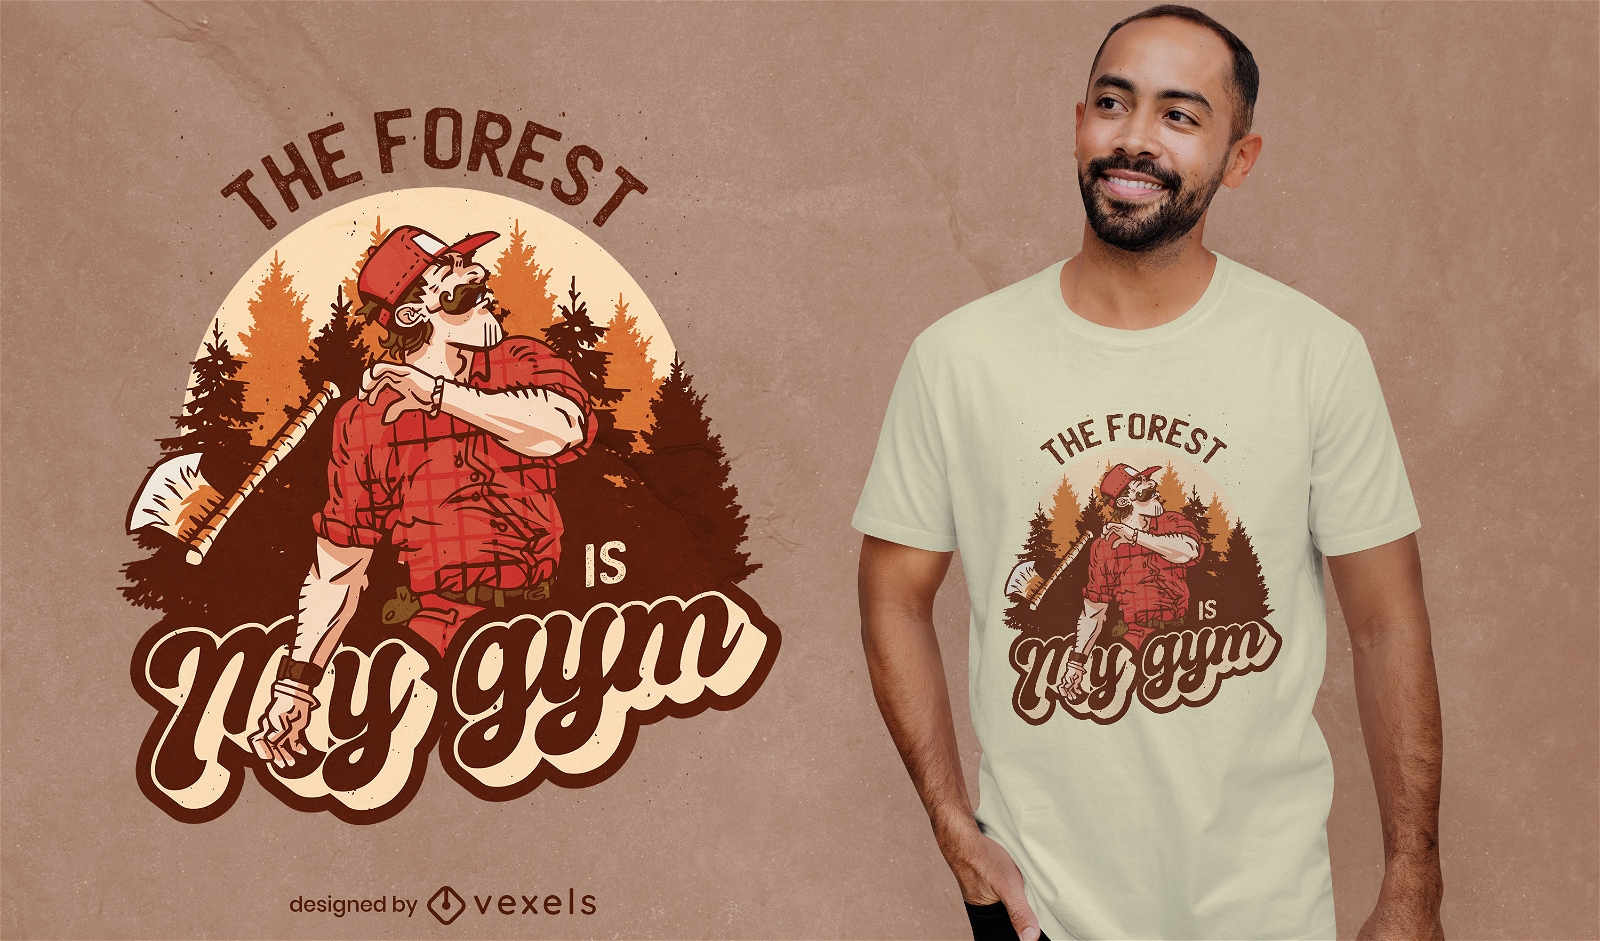 Awesome woodcutter quote t-shirt design